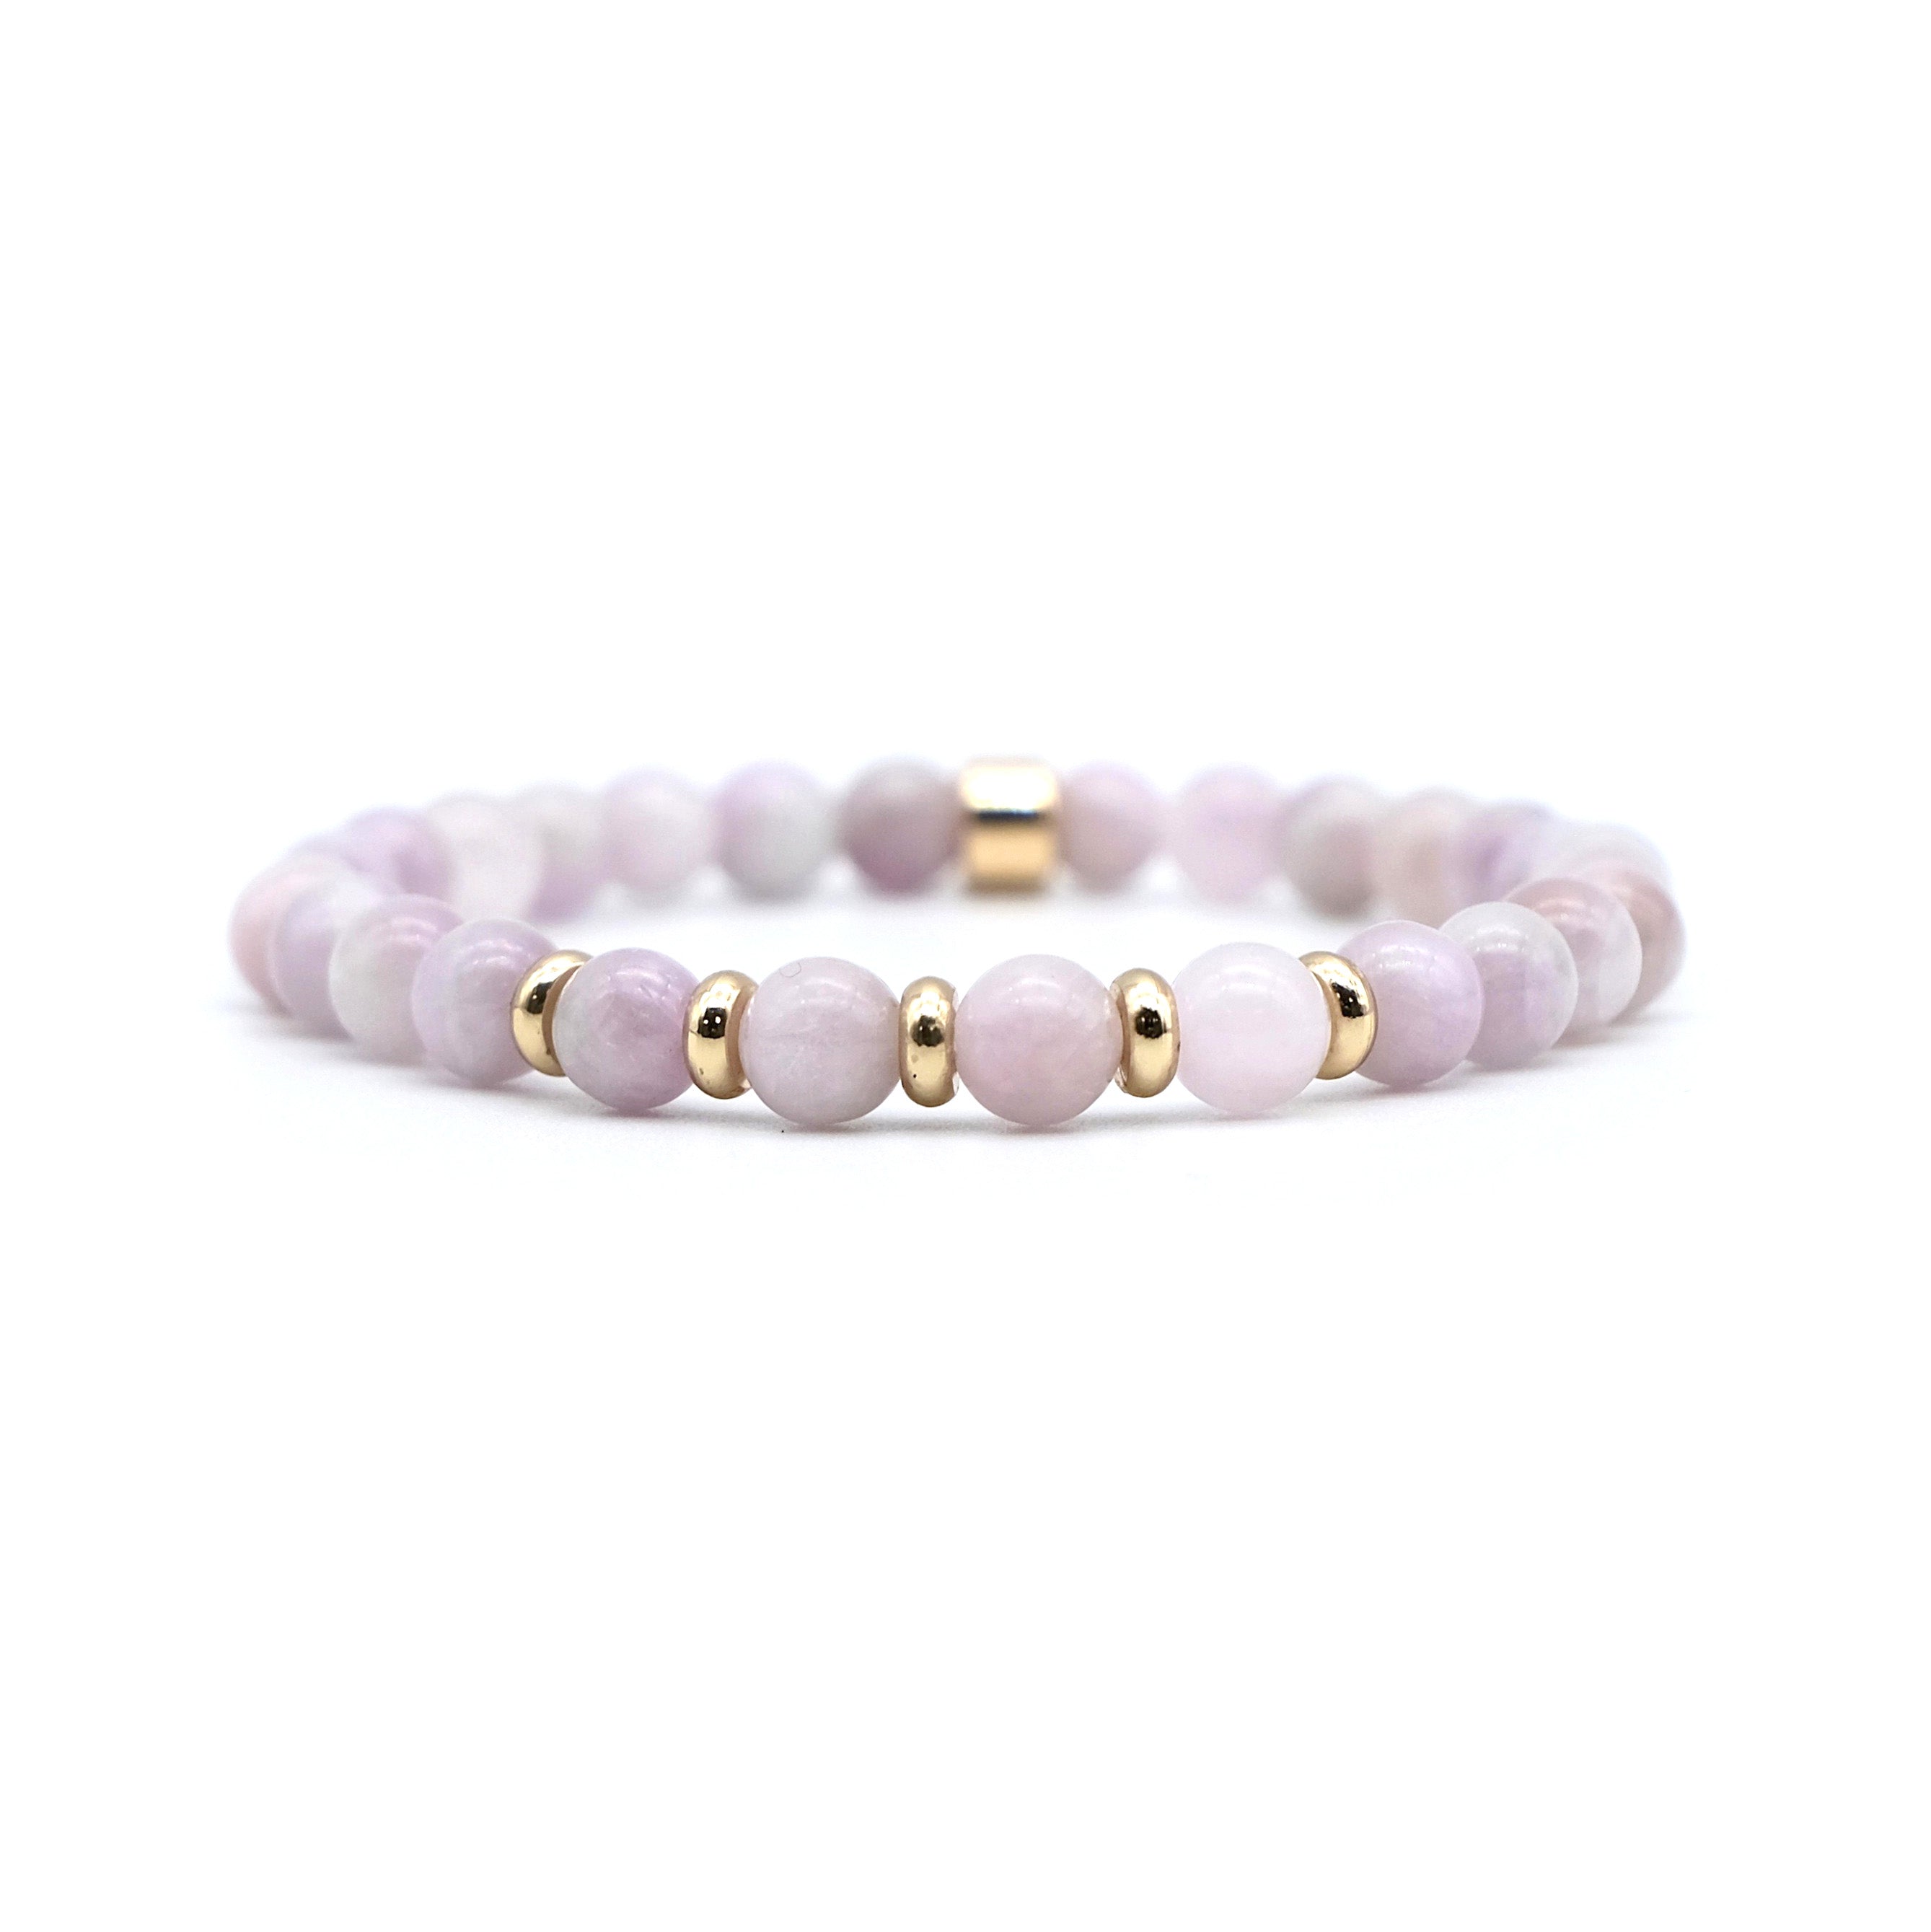 6mm Kunzite gemstone bracelet with 18ct gold plated accessories